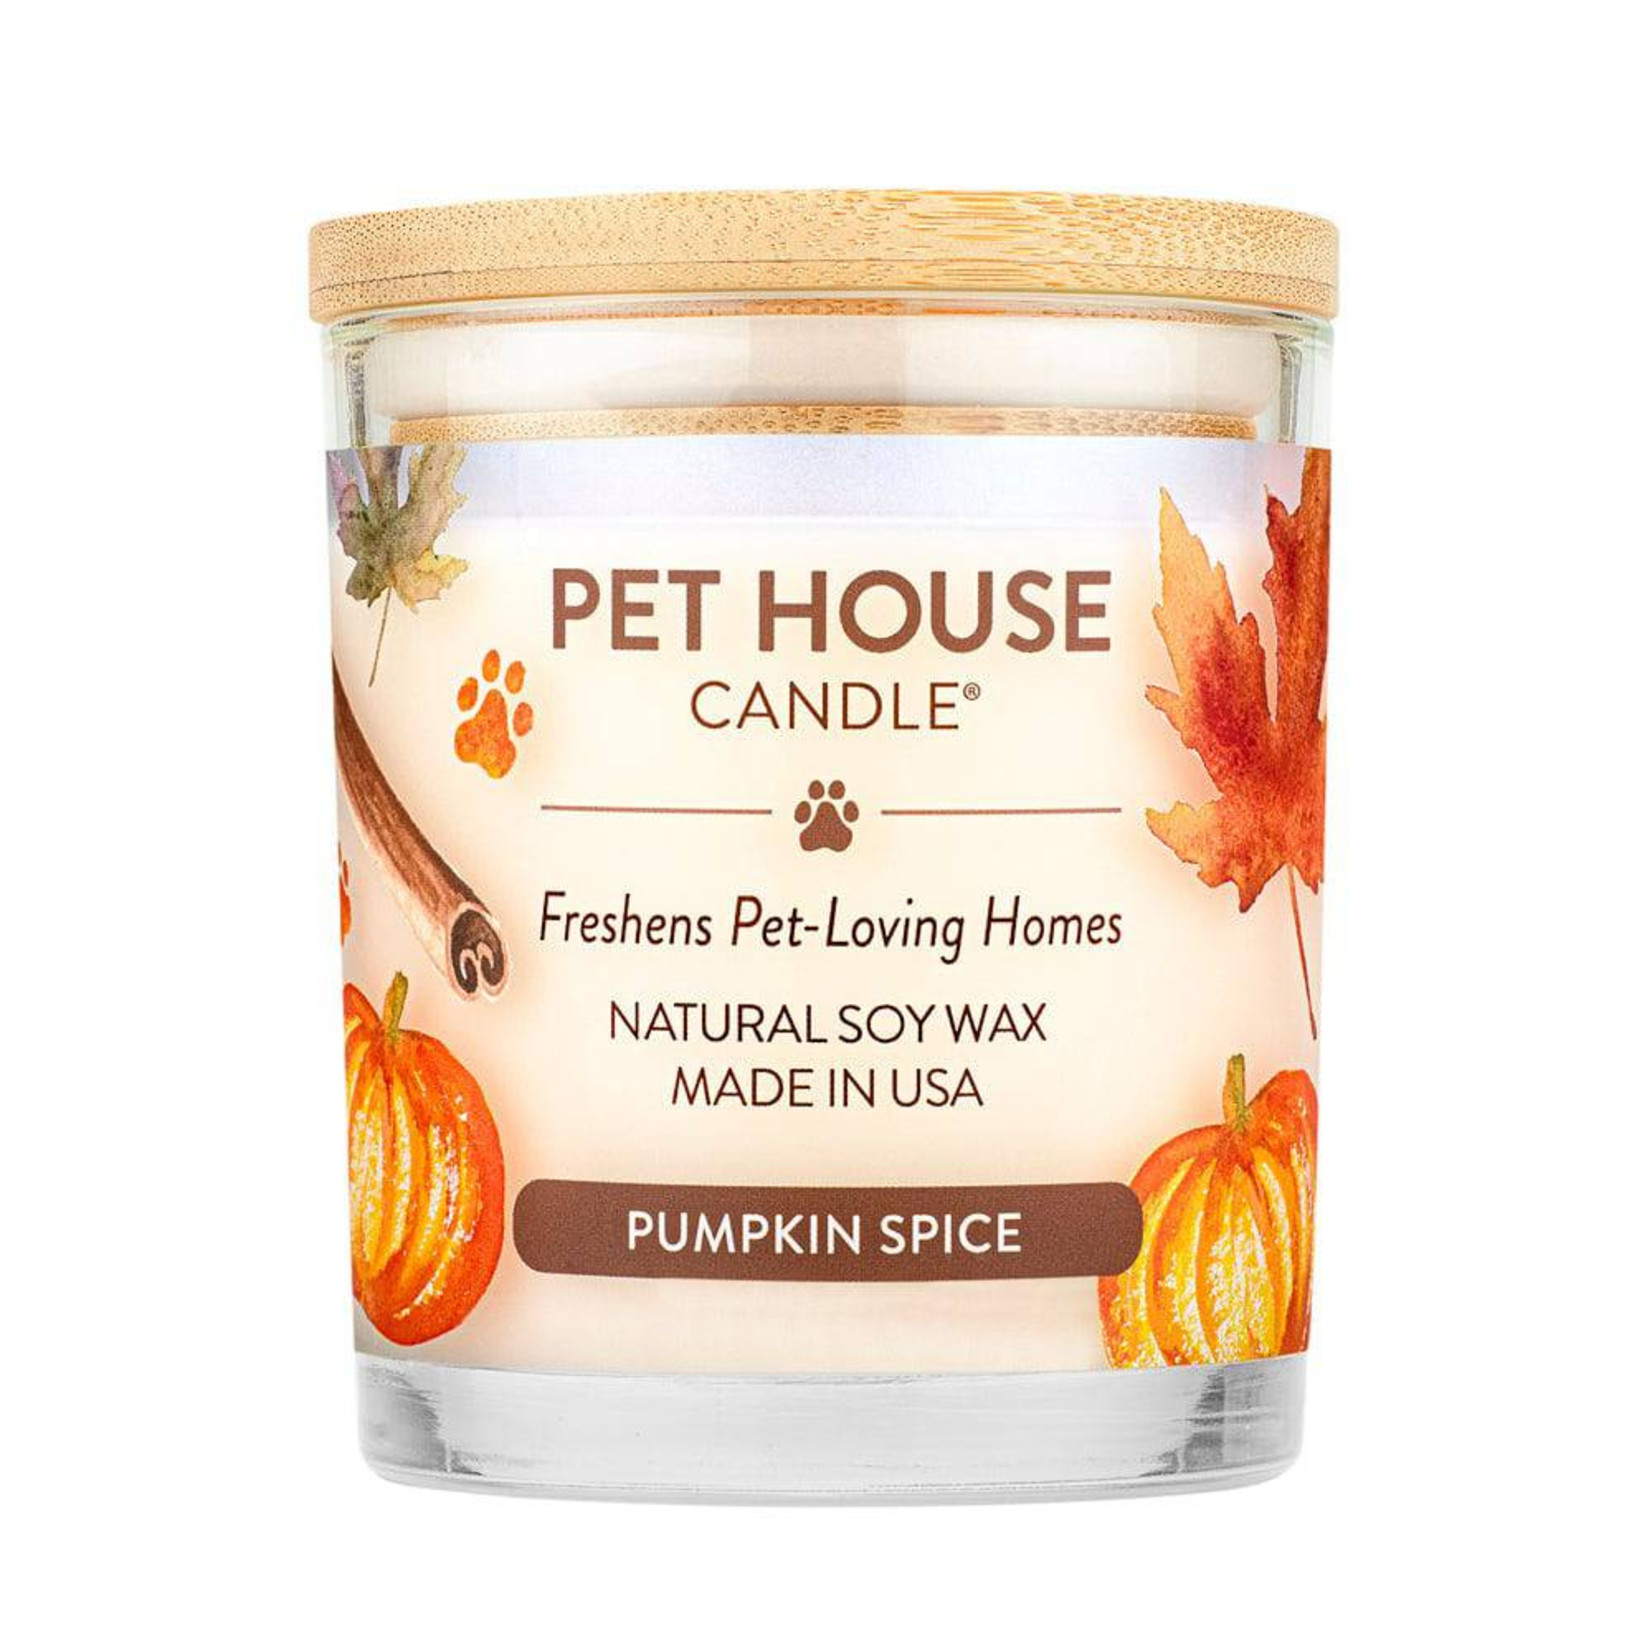 Pet House by One Fur All Pet House Pumpkin Spice Candle